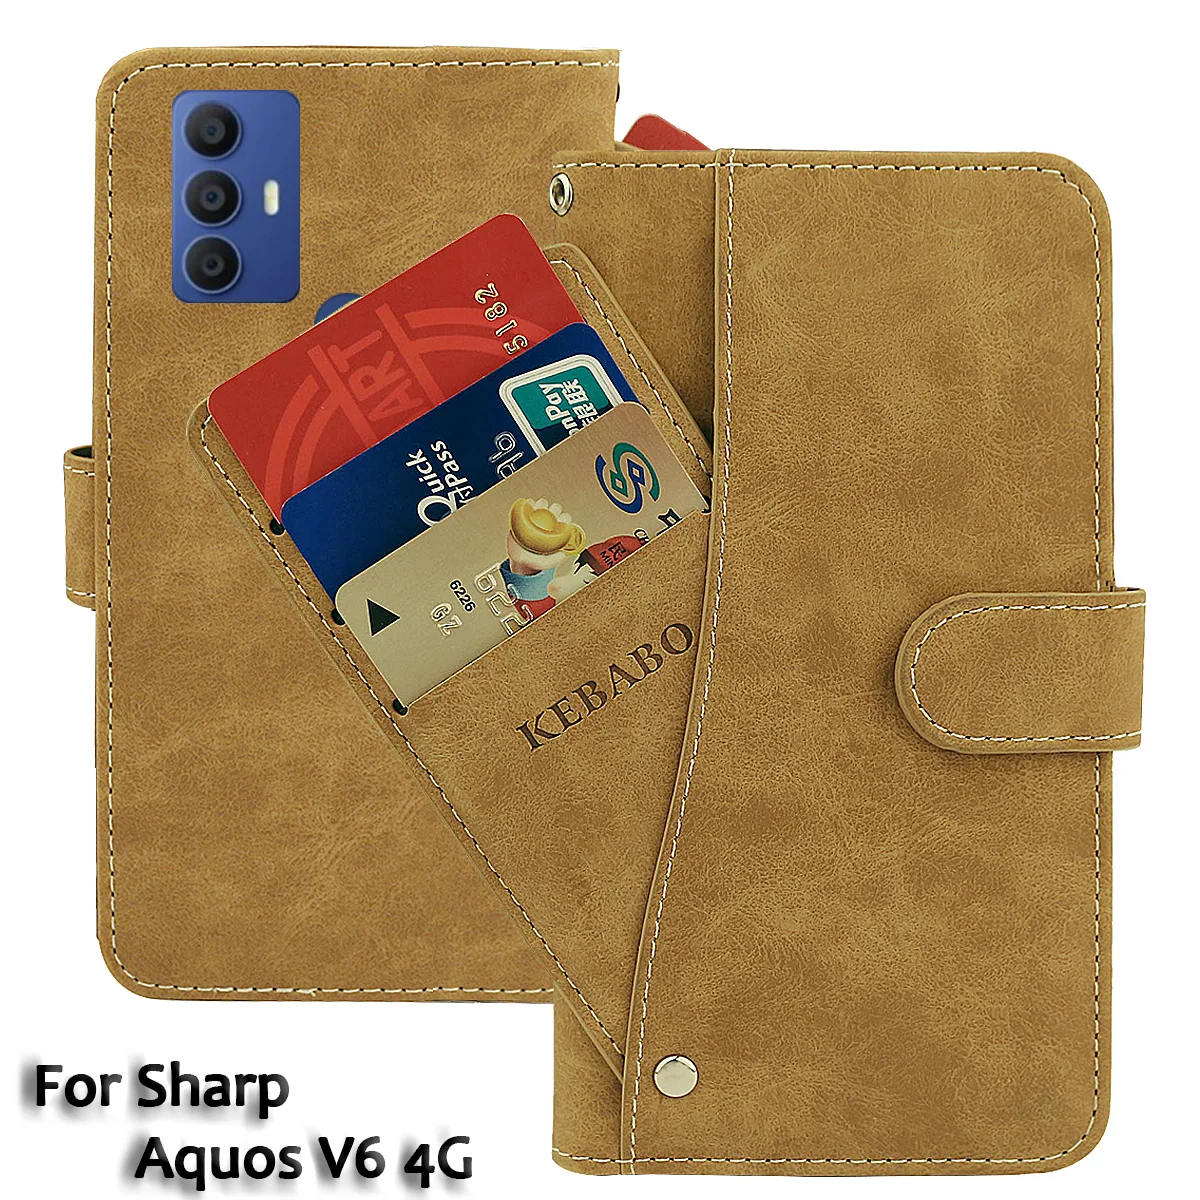 

Vintage Leather Wallet For Sharp Aquos V6 4G Case 6.52" Flip Luxury Card Slots Cover Magnet Phone Protective Cases Bags